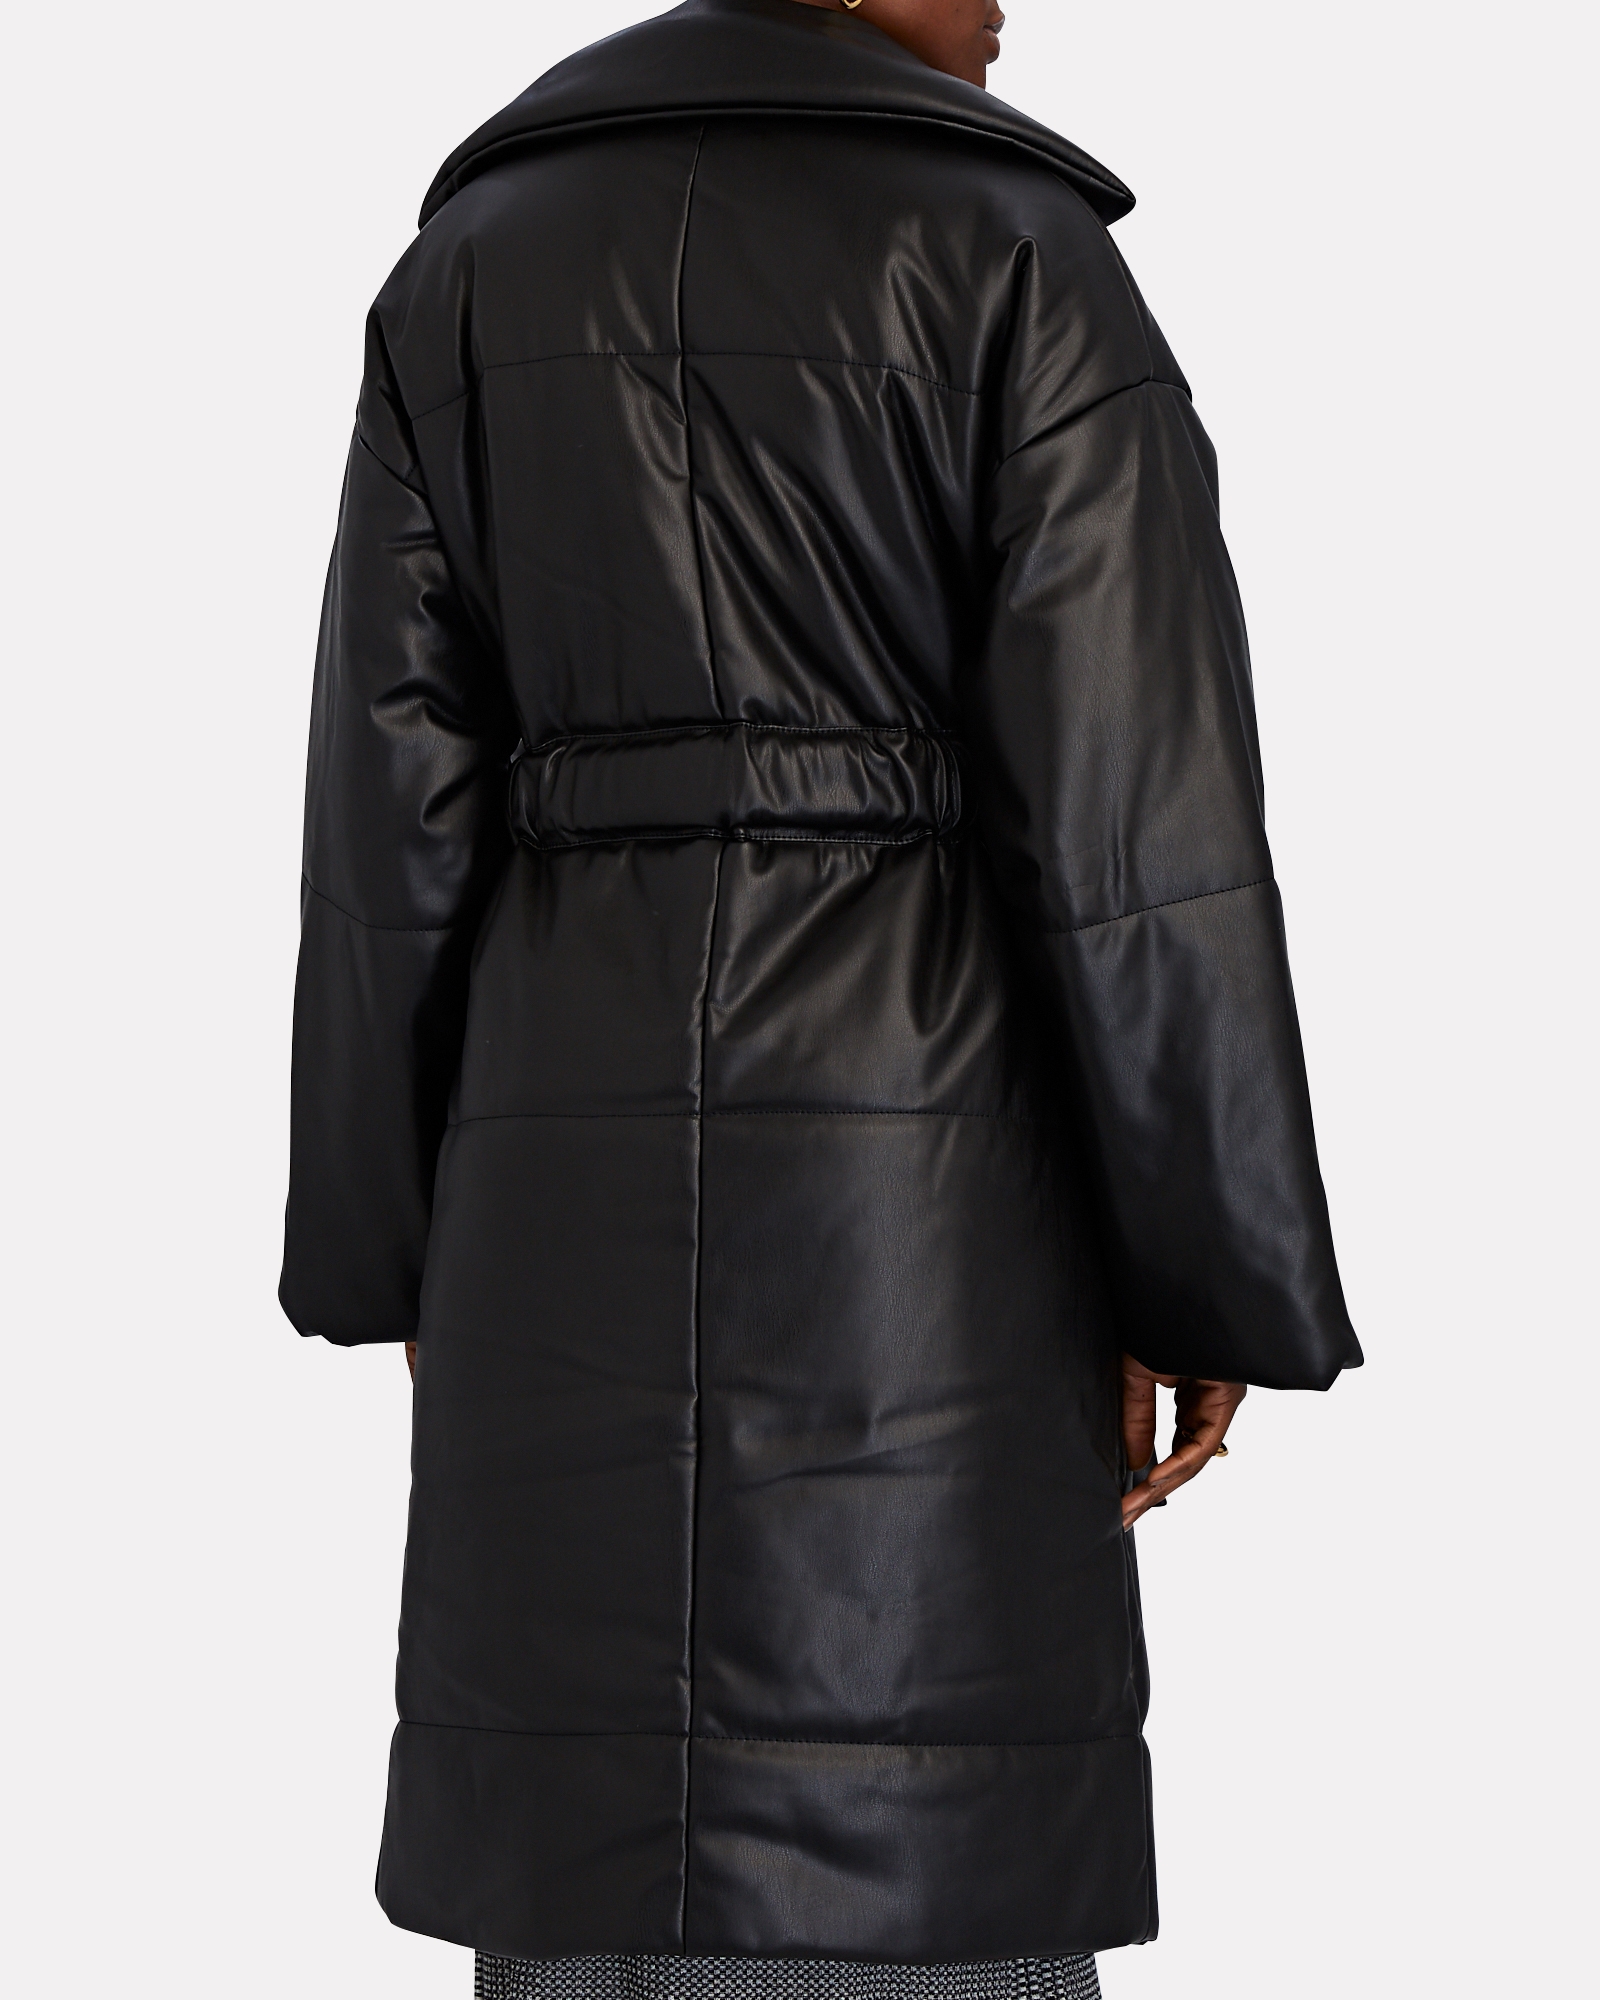 Proenza Schouler White Label Quilted Vegan Leather Puffer Coat in black ...